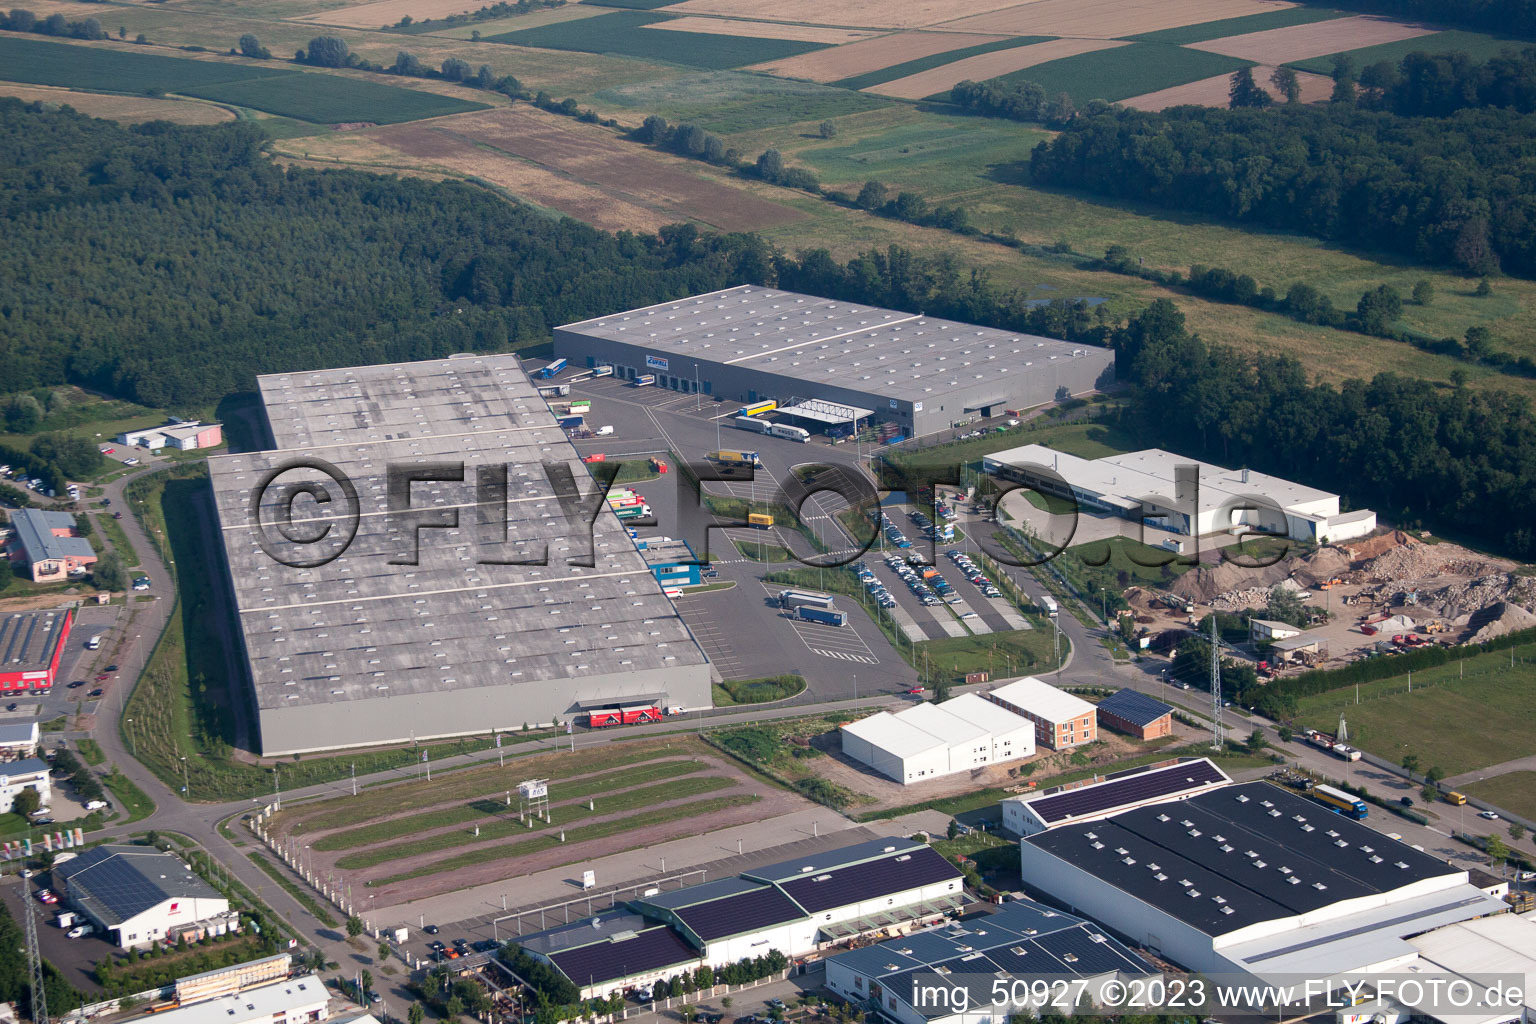 Aerial photograpy of Horst industrial area, coincidence logistics center in the district Minderslachen in Kandel in the state Rhineland-Palatinate, Germany